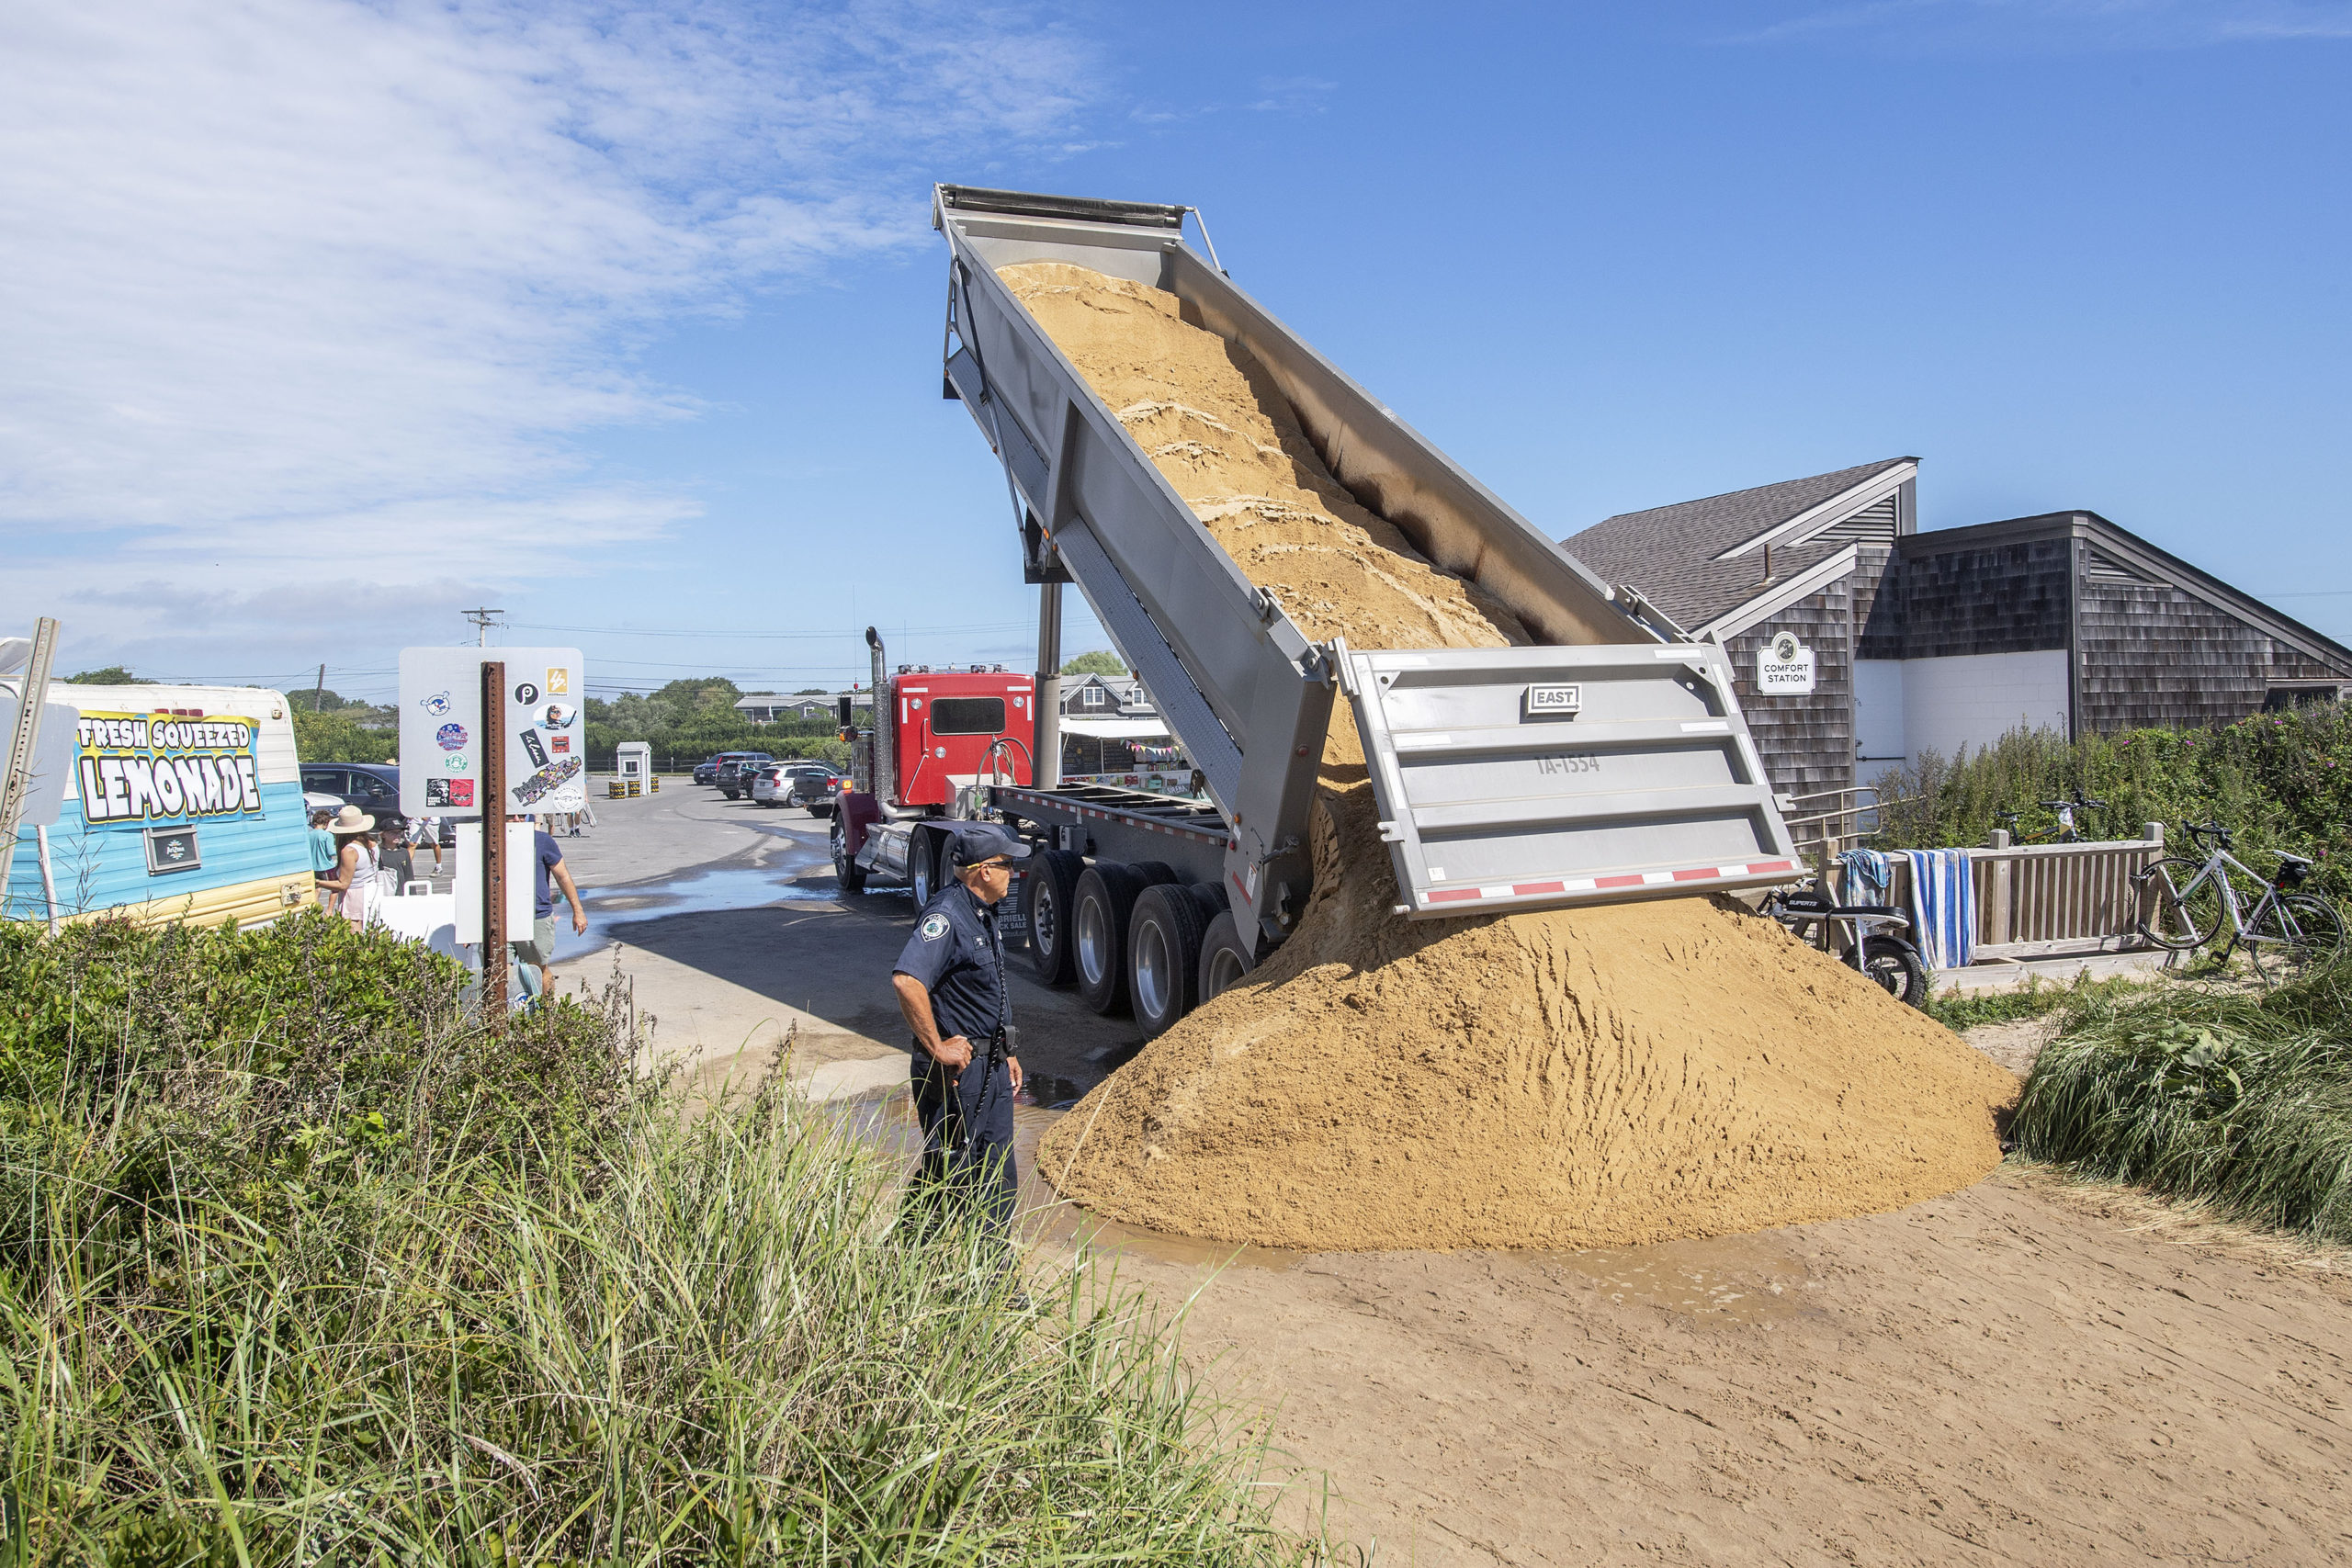 As an East Hampton Town Marine Patrol officer looks on, an East Hampton Town Highway worker dumps a load of sand at the entrance to Ditch Plains Beach in Montauk in preparation for Hurricane Henri on Saturday,    MICHAEL HELLER